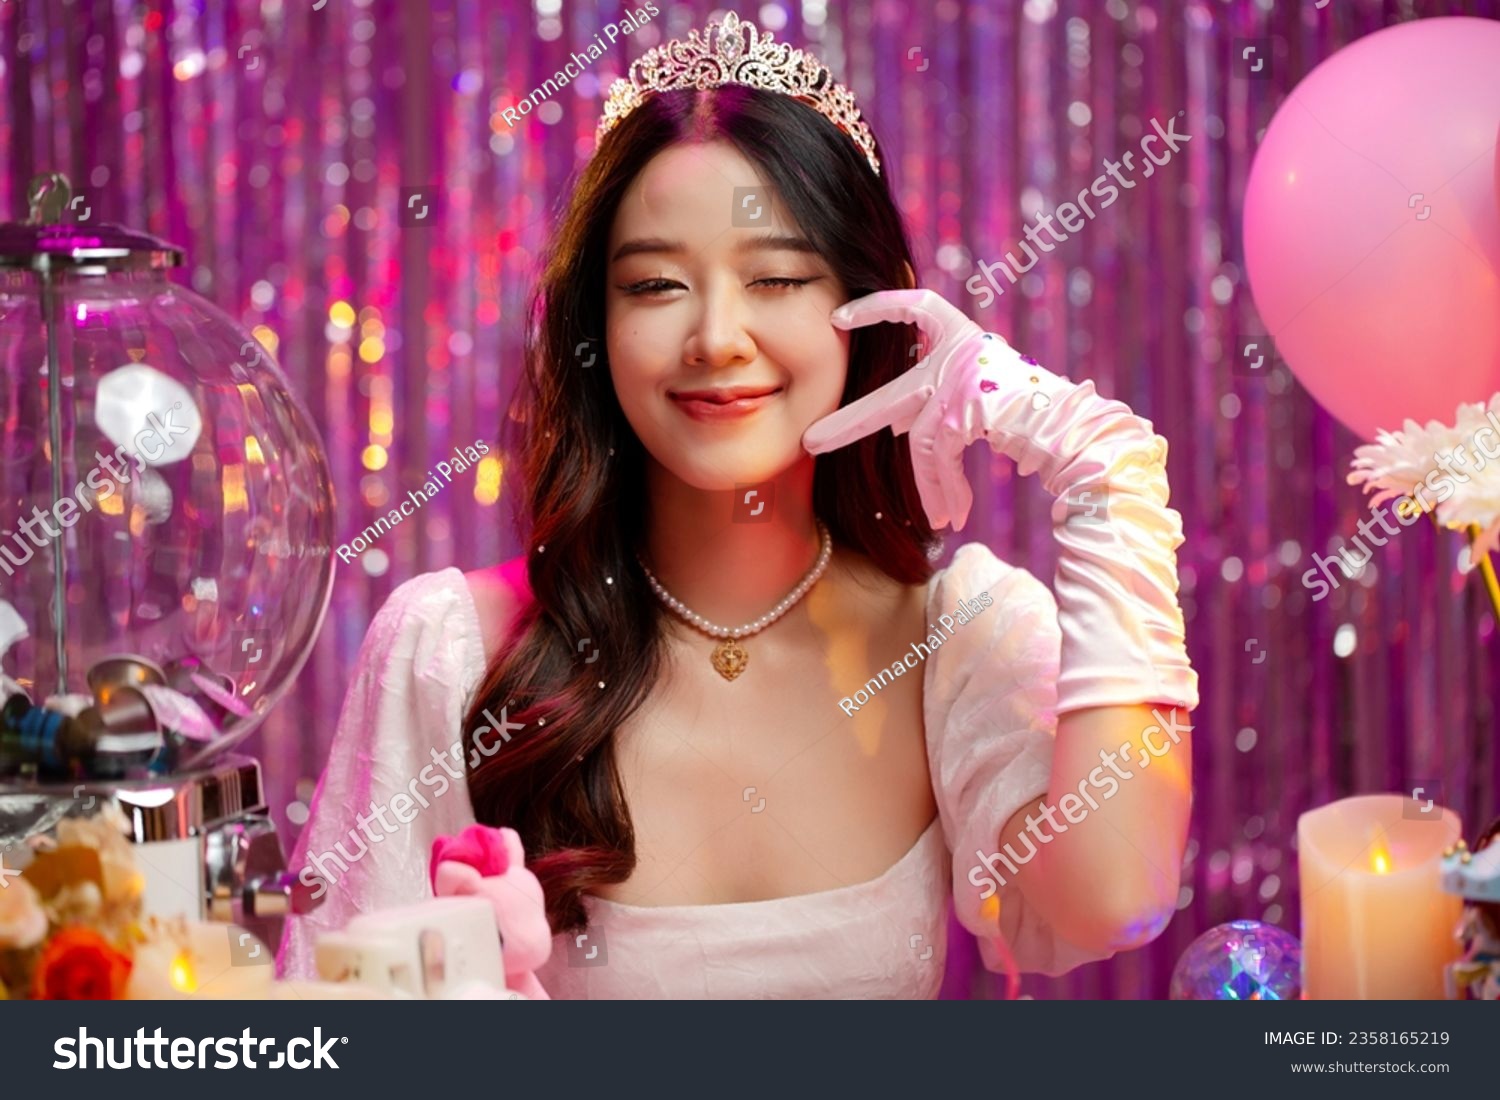 Happy beautiful Asian girl in princess dress showing birthday cake. Birthday princess photography theme is popular in Asia. #2358165219